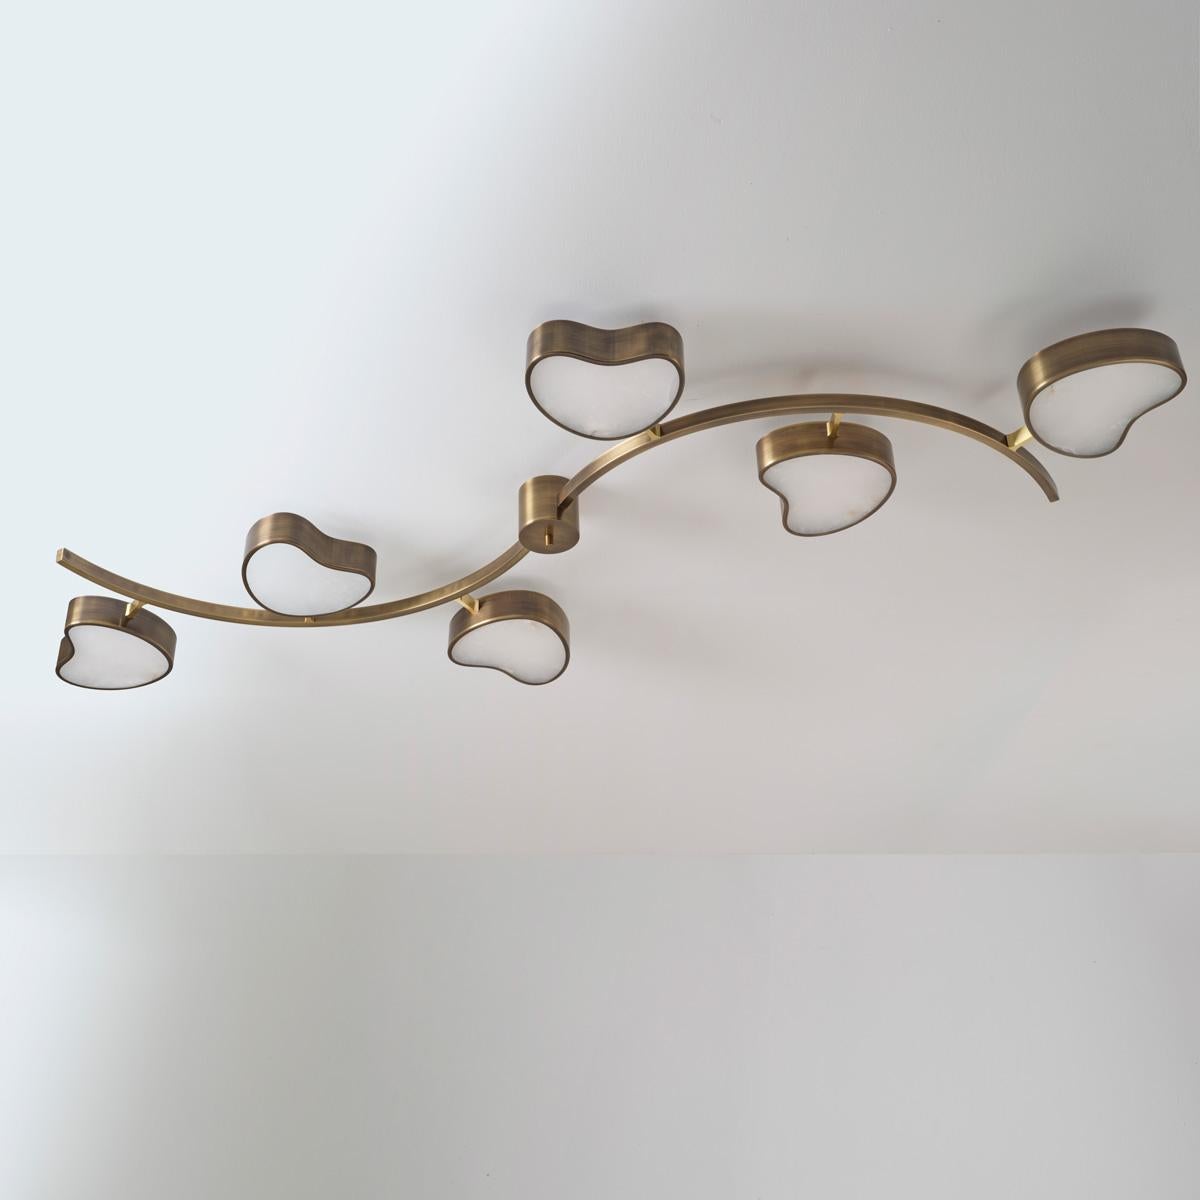 Cuore N.6 Ceiling Light by Gaspare Asaro. Satin Brass and Sand White Finish In New Condition For Sale In New York, NY